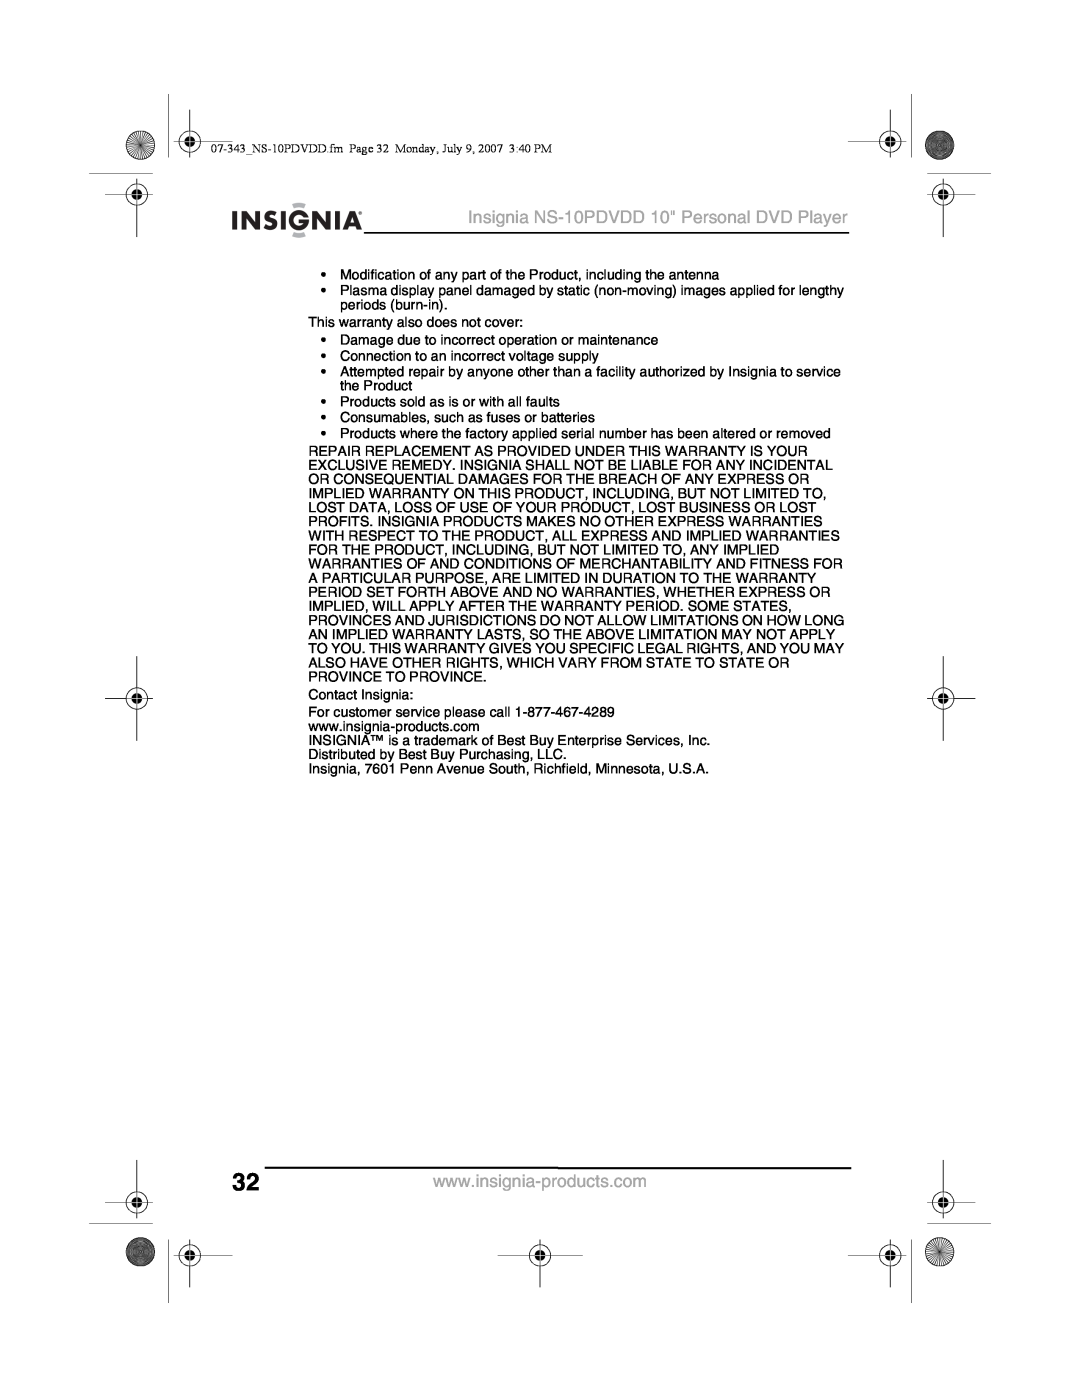 Insignia Insignia NS-10PDVDD 10 Personal DVD Player, Modification of any part of the Product, including the antenna 